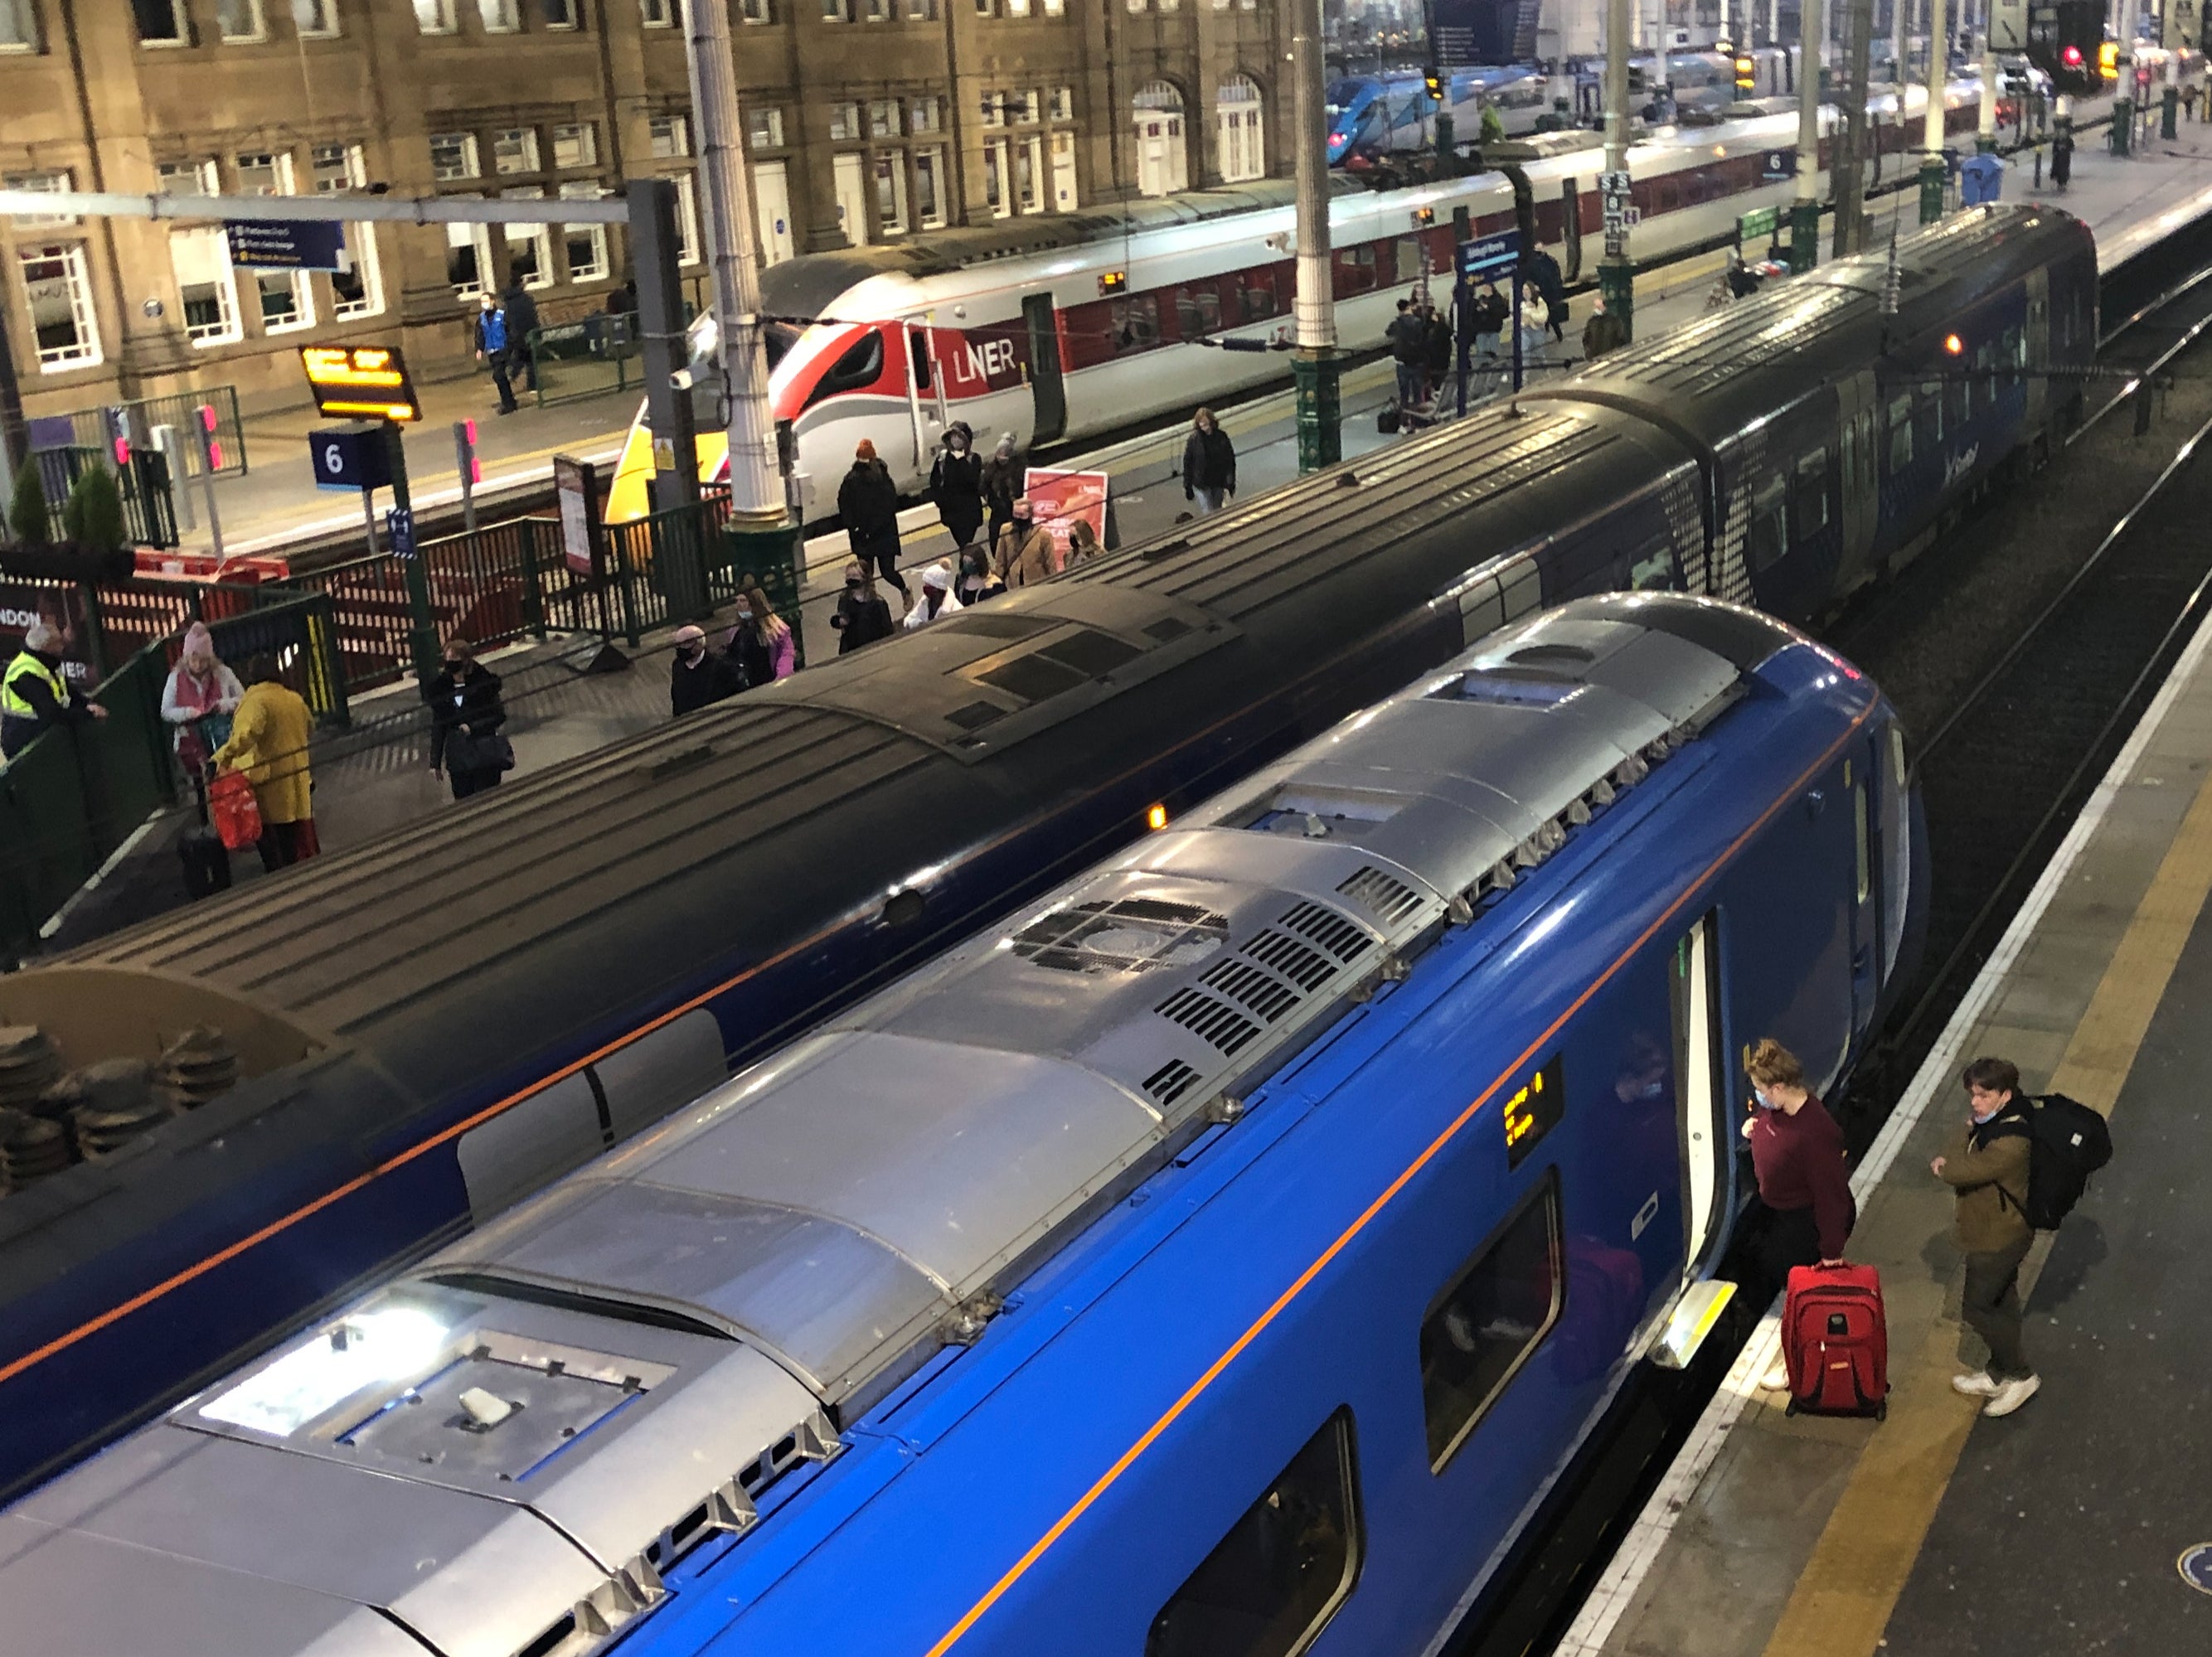 Departing soon: LNER and Lumo compete with each other and Avanti West Coast from Edinburgh Waverley station to London